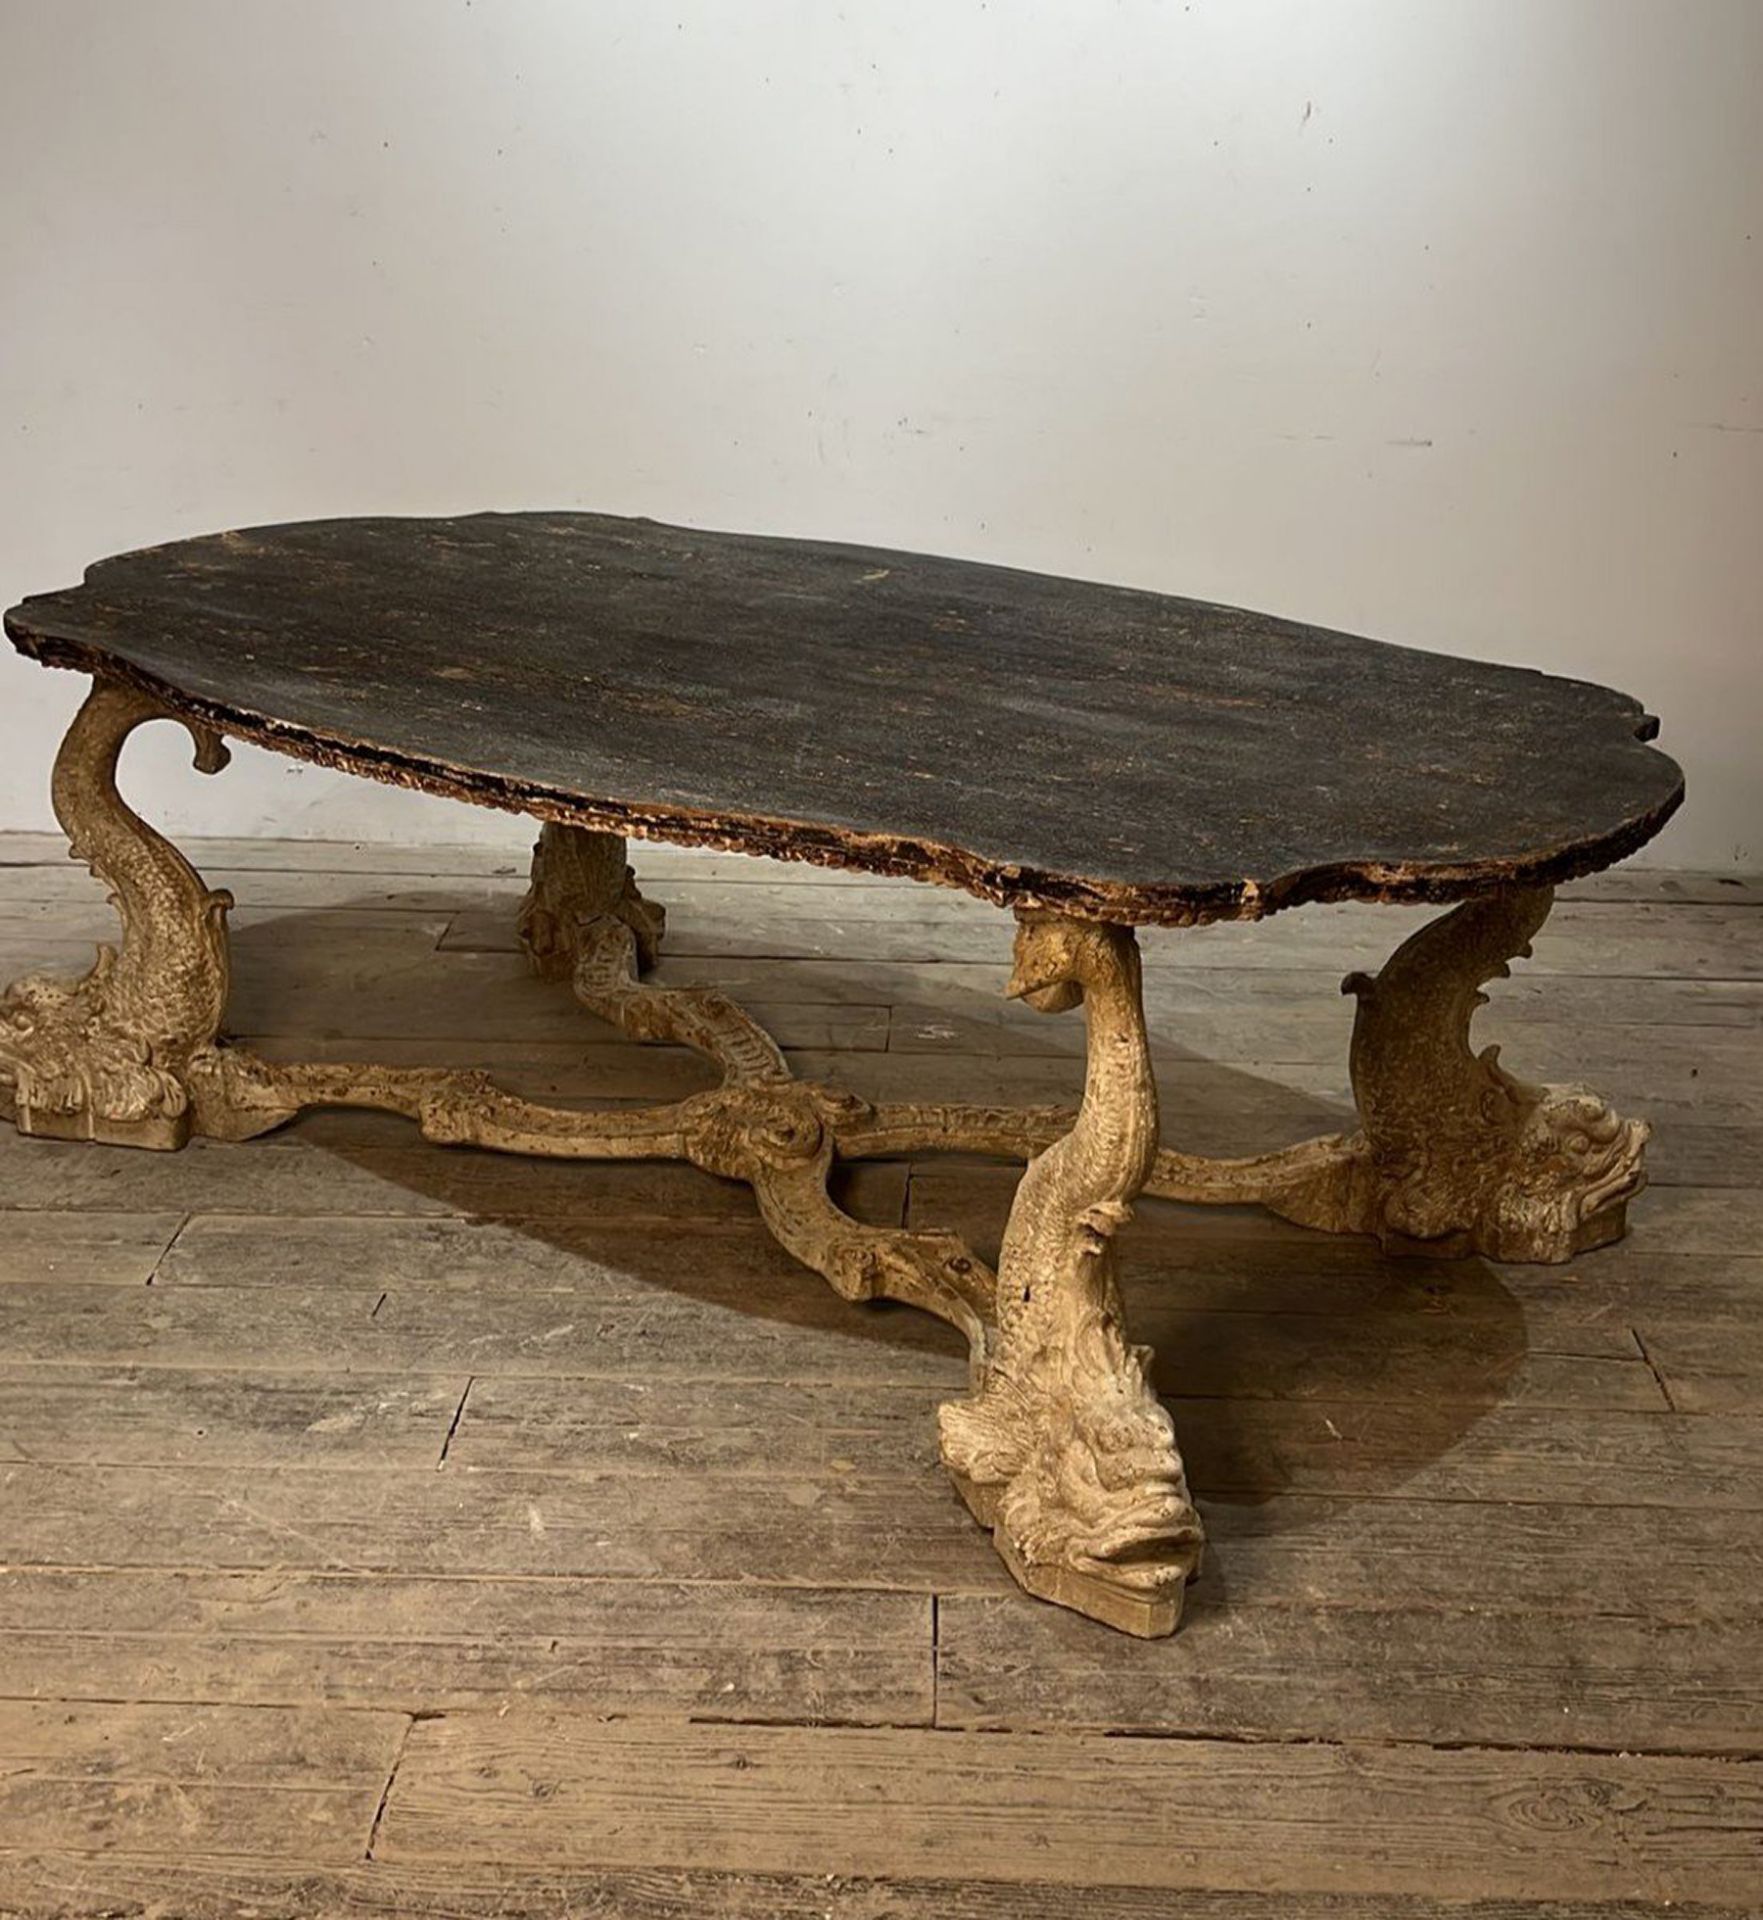 Large Italian Table from the 50s with dolphin legs, Venetian work of the 20th century - Bild 4 aus 5